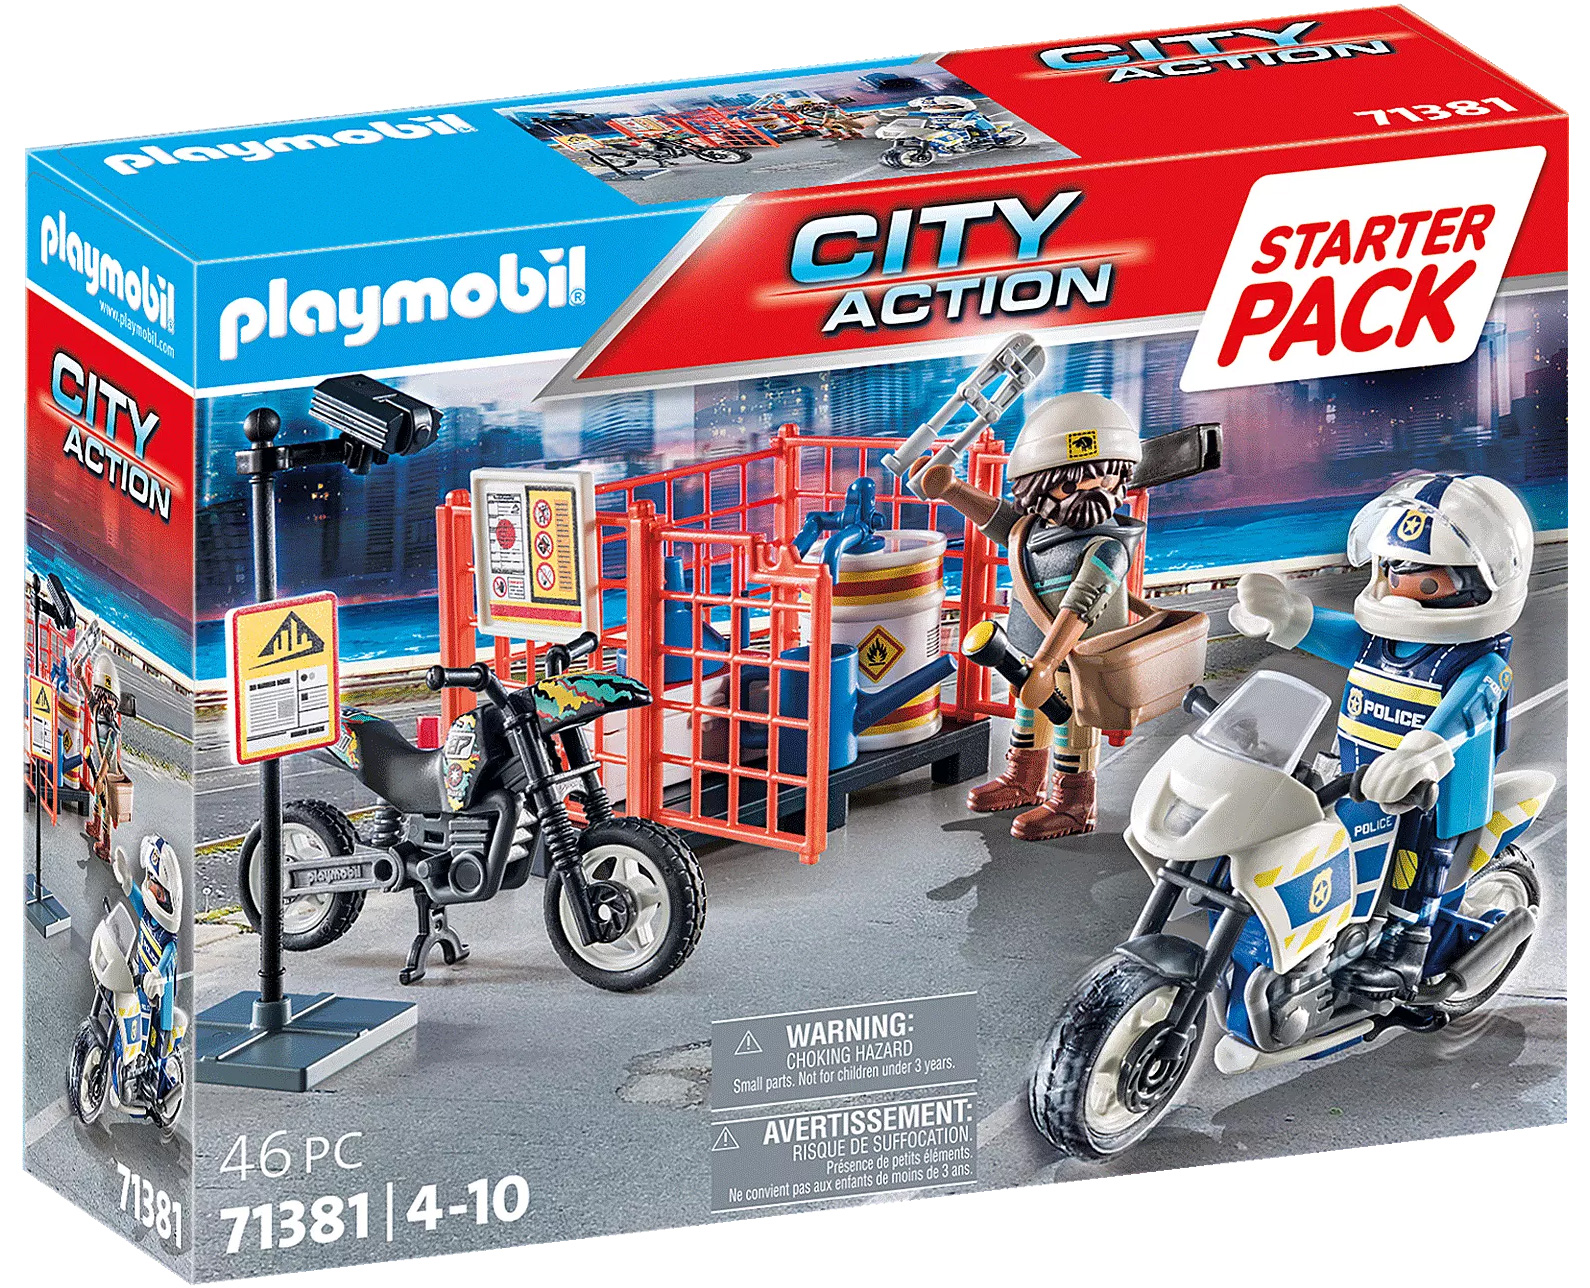 Playmobil City Action 71381 pas cher, Starter Pack Police